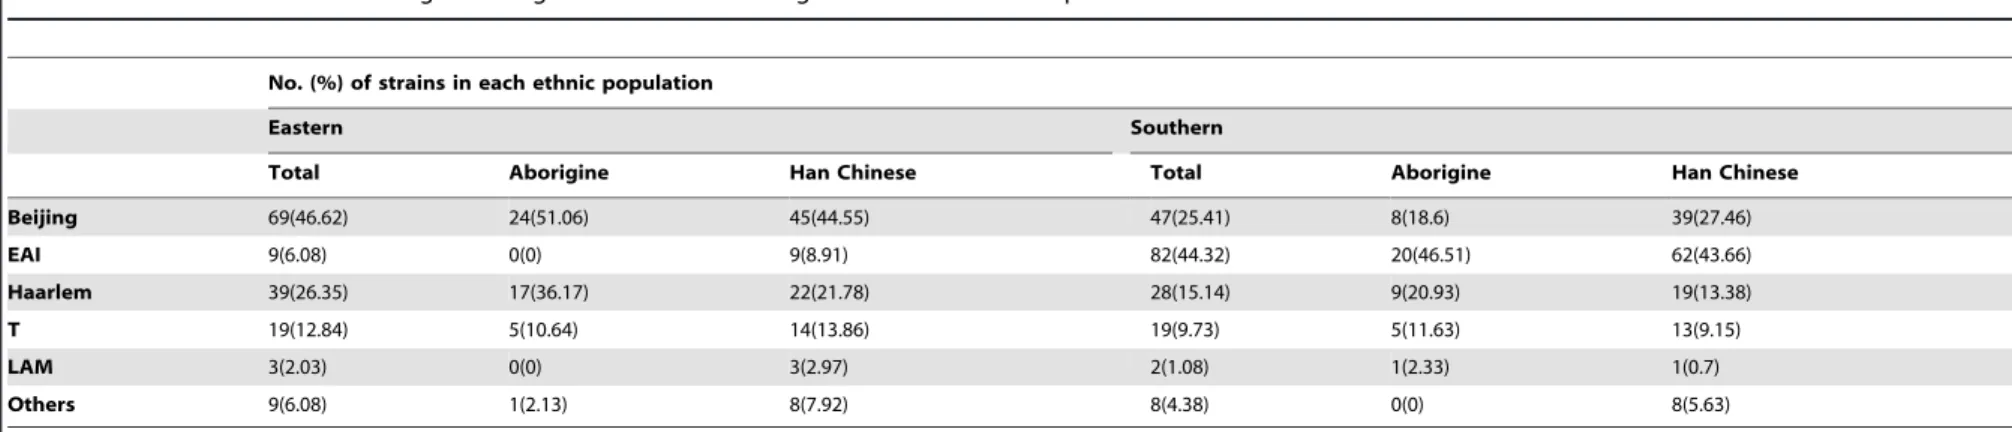 Table 3. Association between cluster rates and M. tuberculosis genotype in aboriginal and Han Chinese populations.